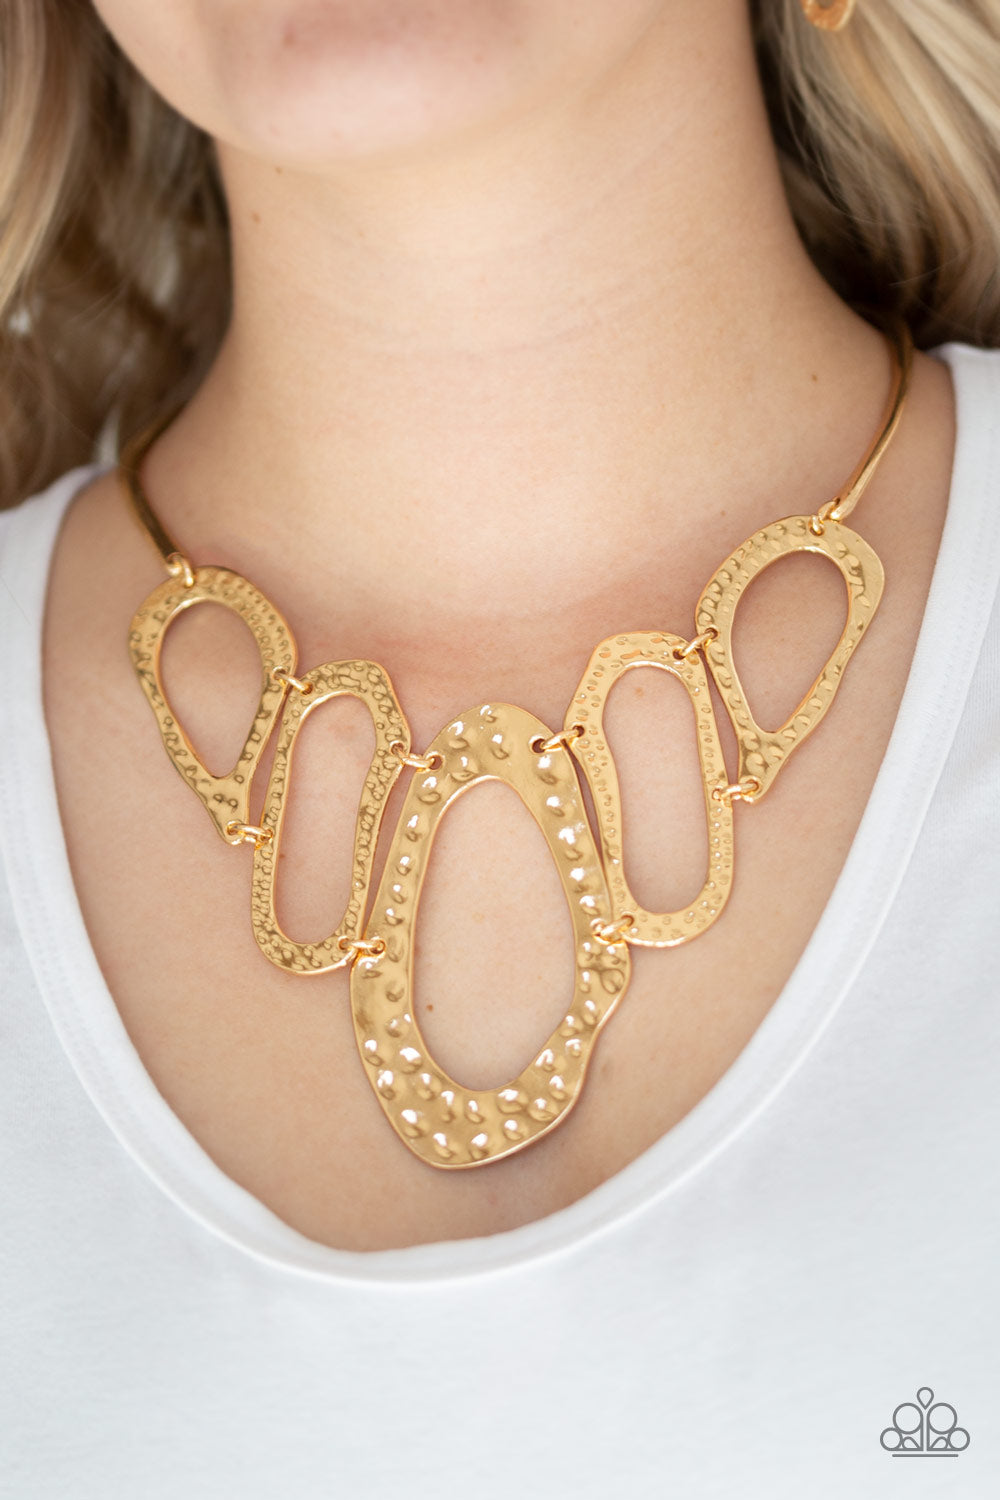 PRIME PROWESS - GOLD OVALS TEXTURED NECKLACE